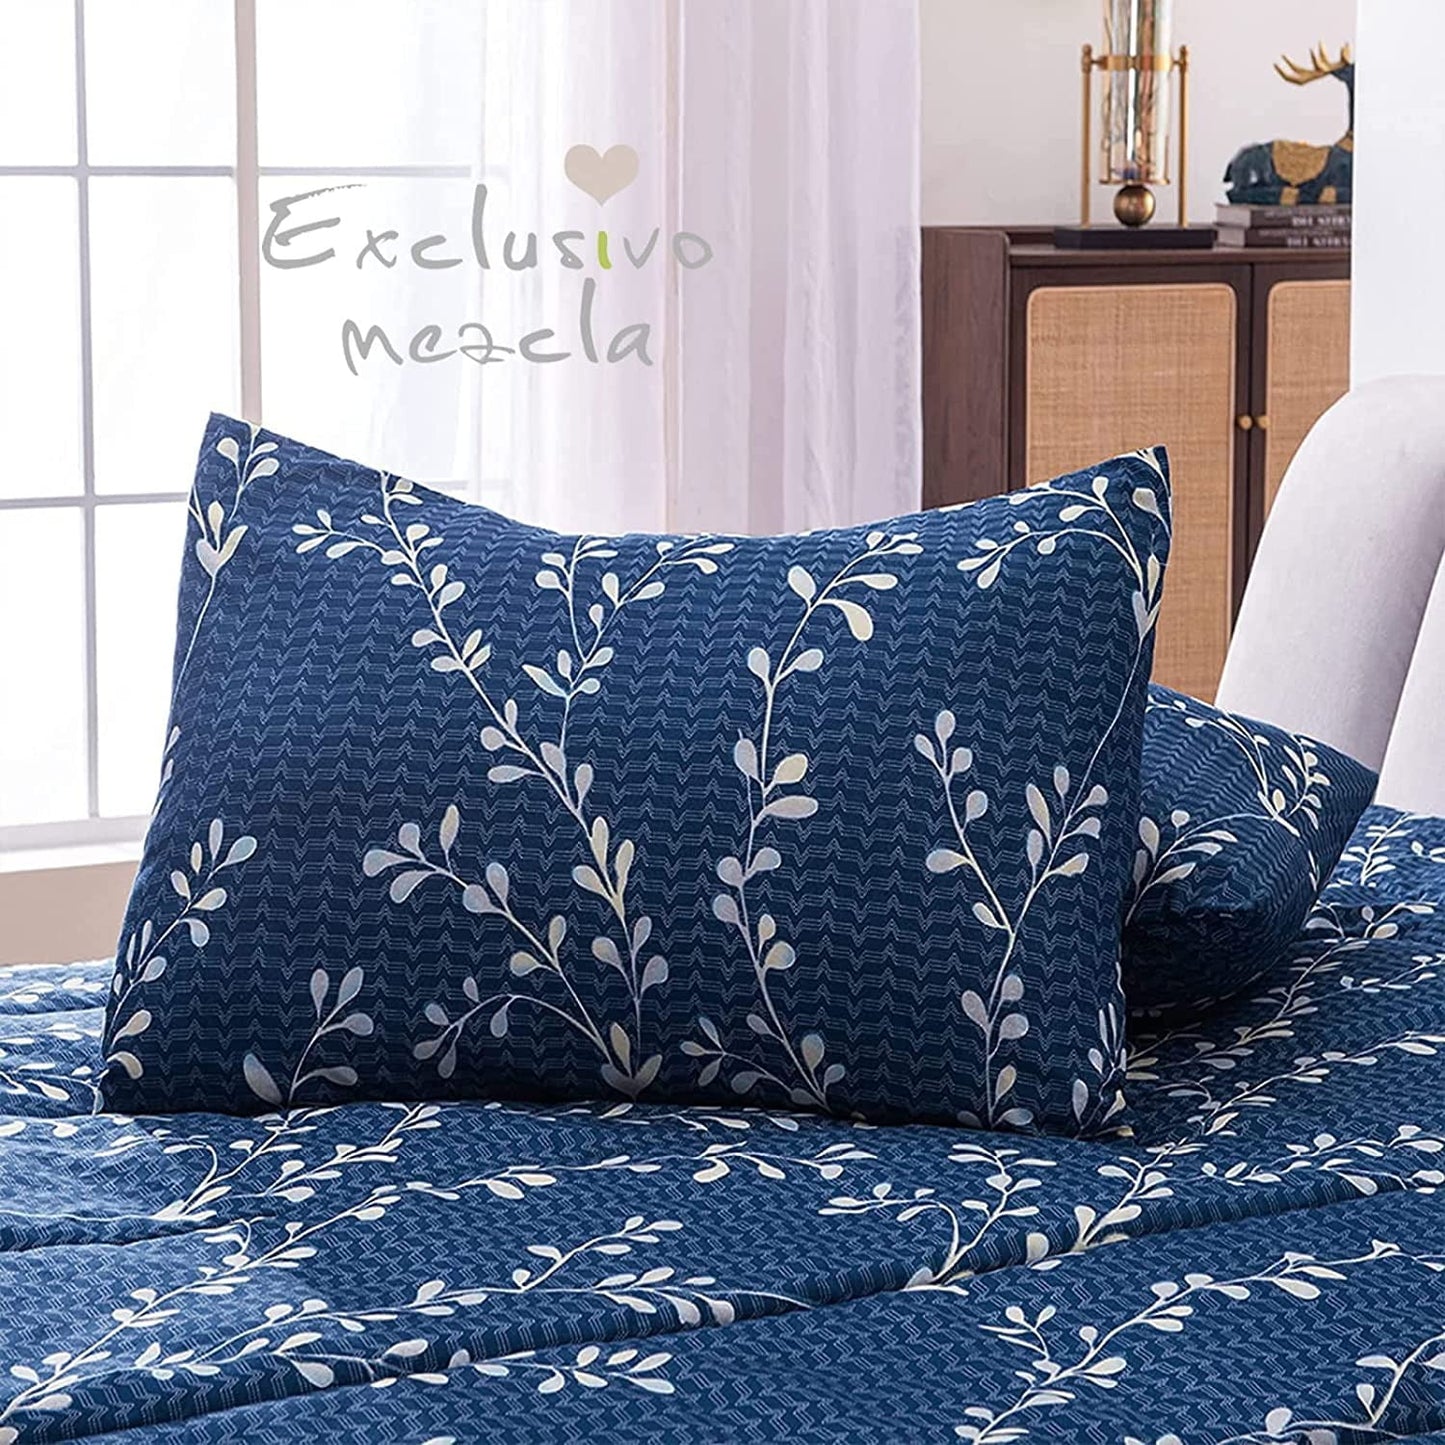 Exclusivo Mezcla 2-Piece Floral Twin Comforter Set, Microfiber Bedding Down Alternative Comforter for All Seasons with 1 Pillow Sham, Navy